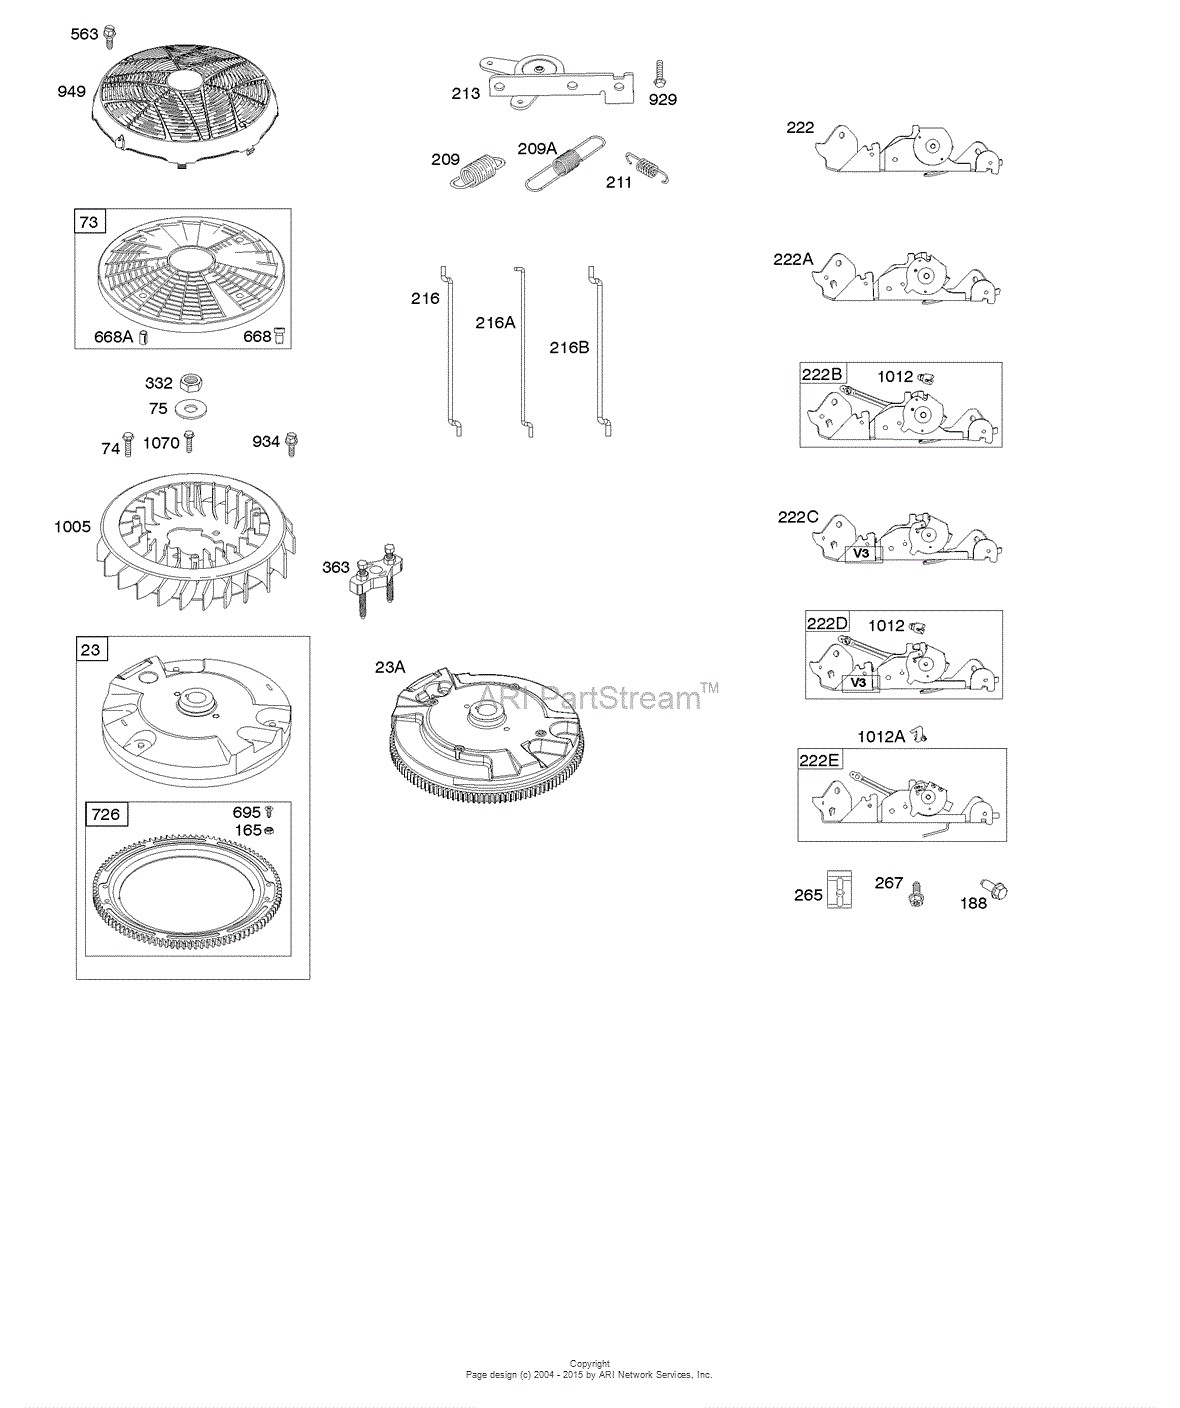 Wiring Diagram Model 44m777 B&amp;s Briggs and Stratton 44m777 0113 E1 Parts Diagram for Flywheel Controls Of Wiring Diagram Model 44m777 B&amp;s